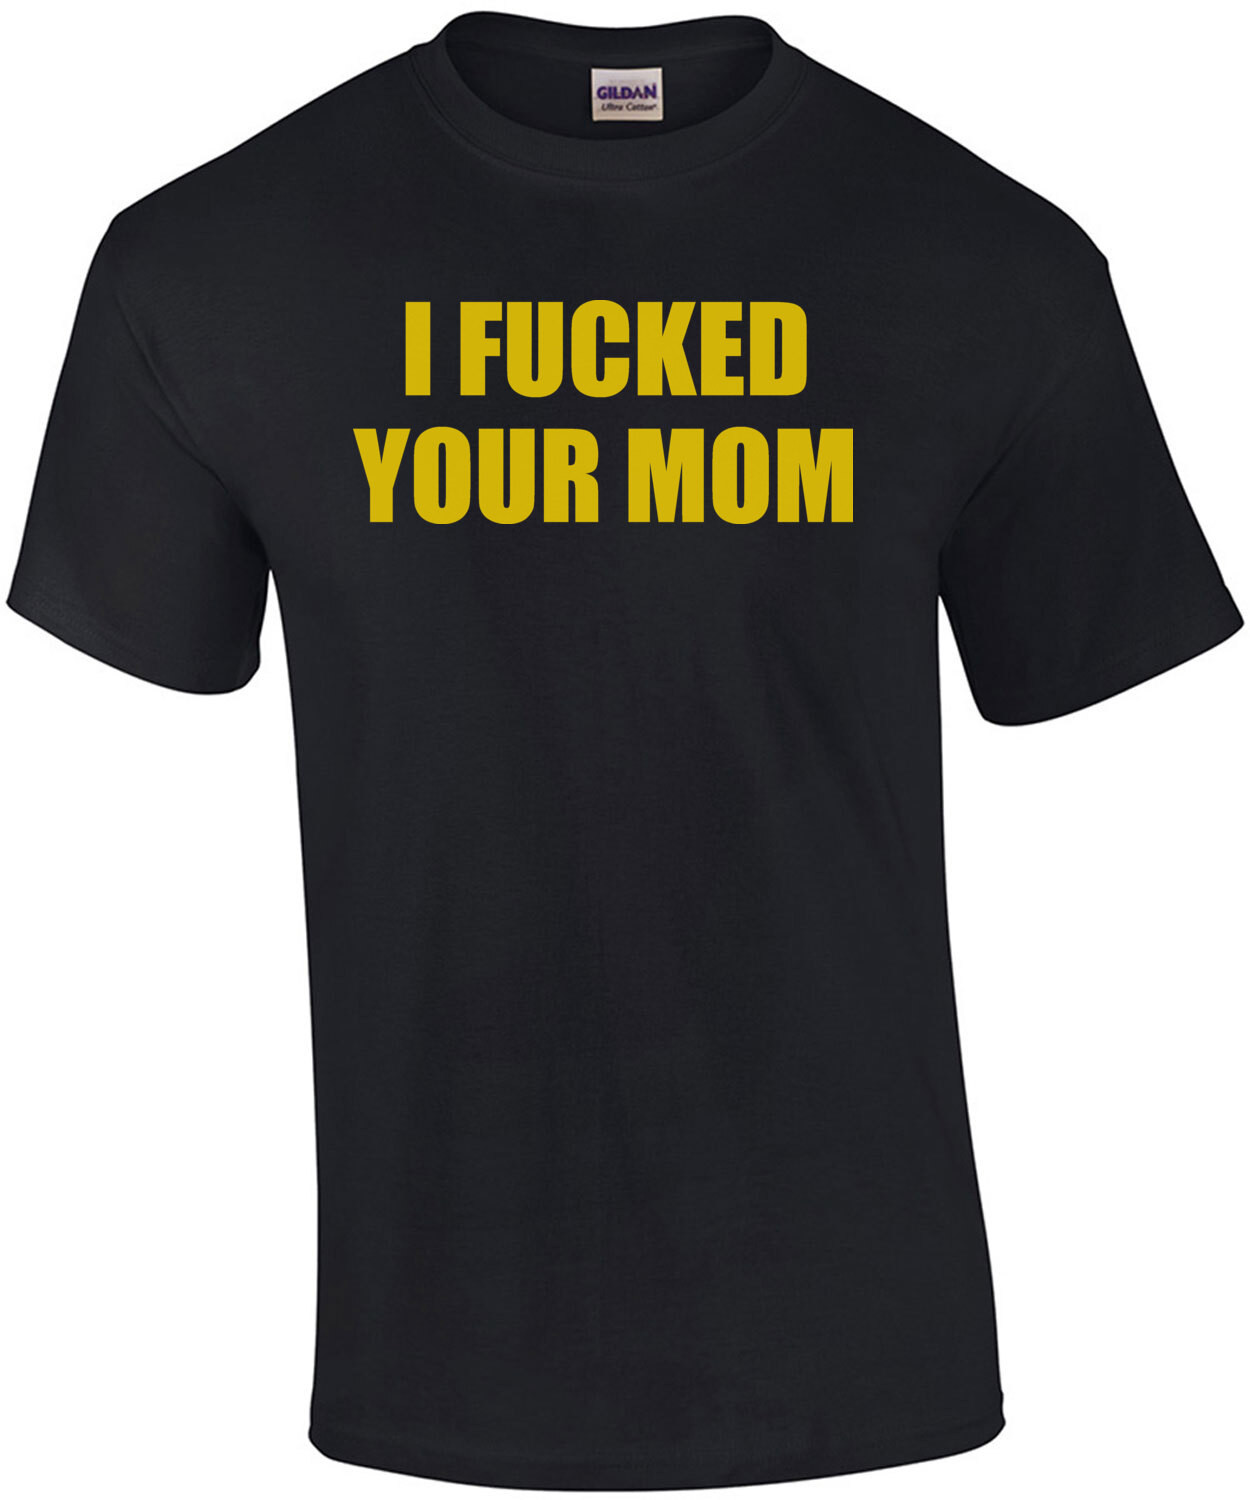 I fucked your mom. Offensive Sexual T-Shirt